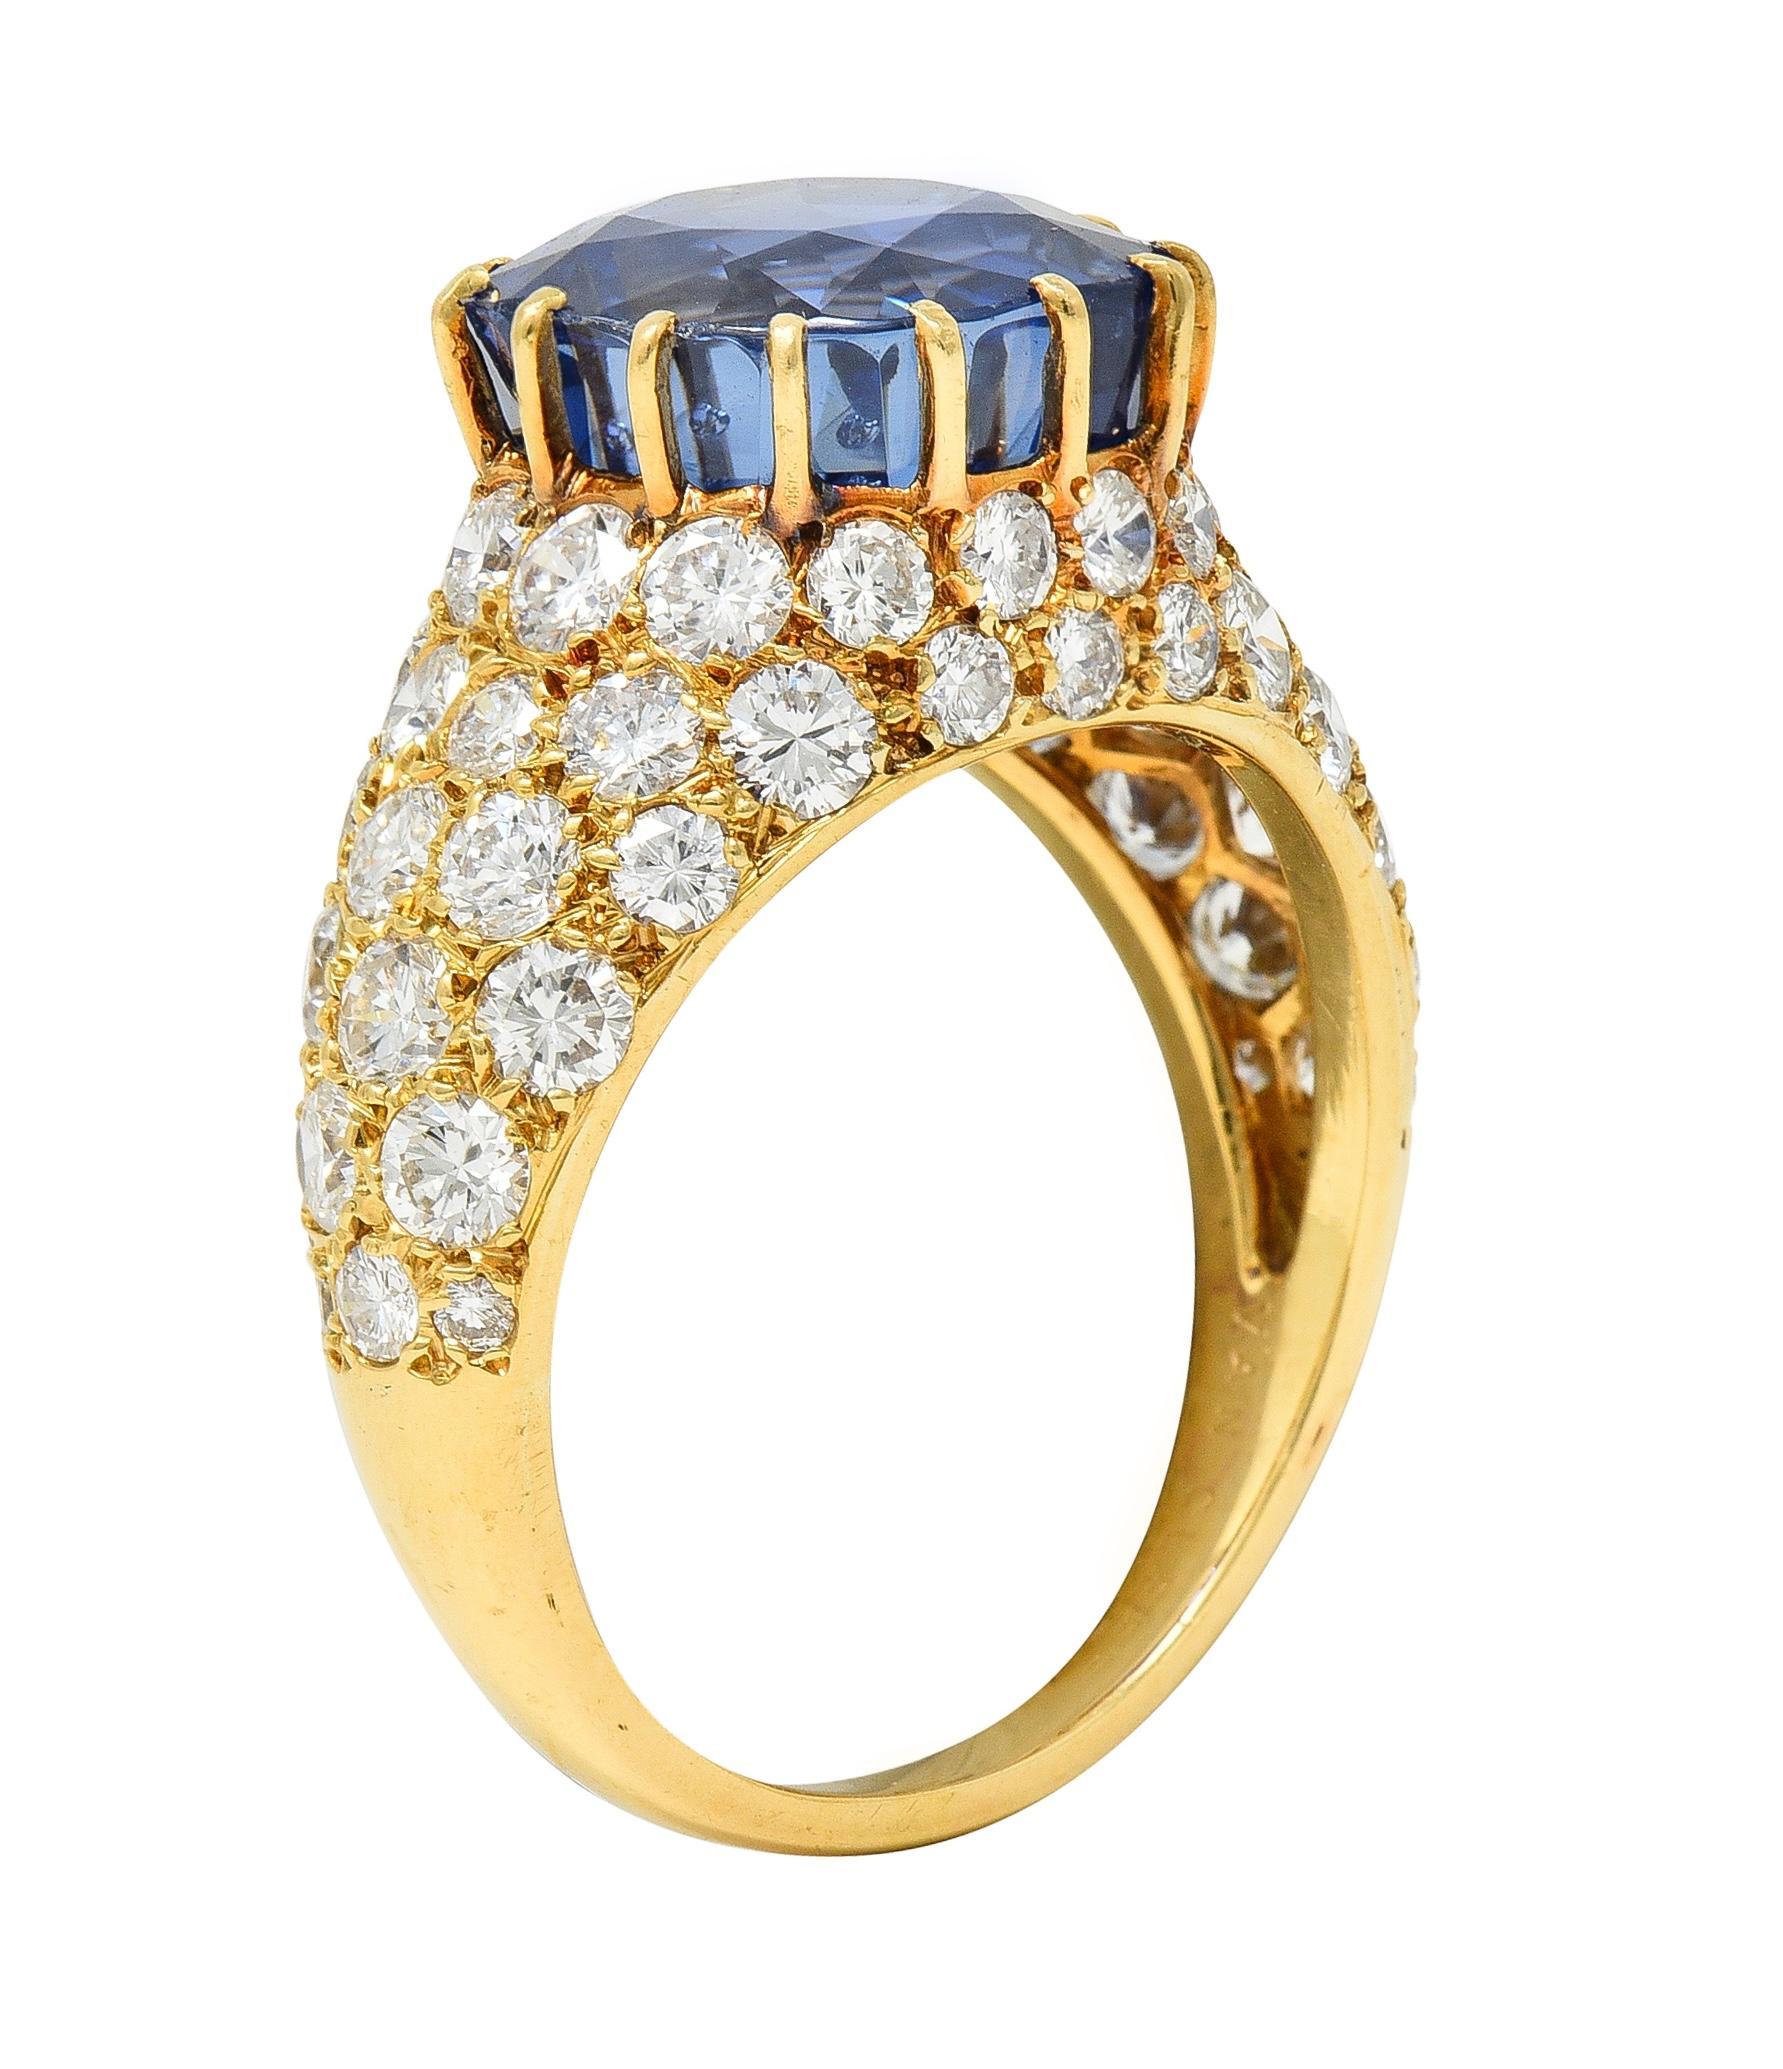 Centering a cushion cut sapphire weighing 9.43 carats total - transparent medium blue 
Natural Sri Lankan in origin with no indications of heat treatment 
Set with talon prongs with a domed gold surround
Pavé set with round brilliant cut diamonds